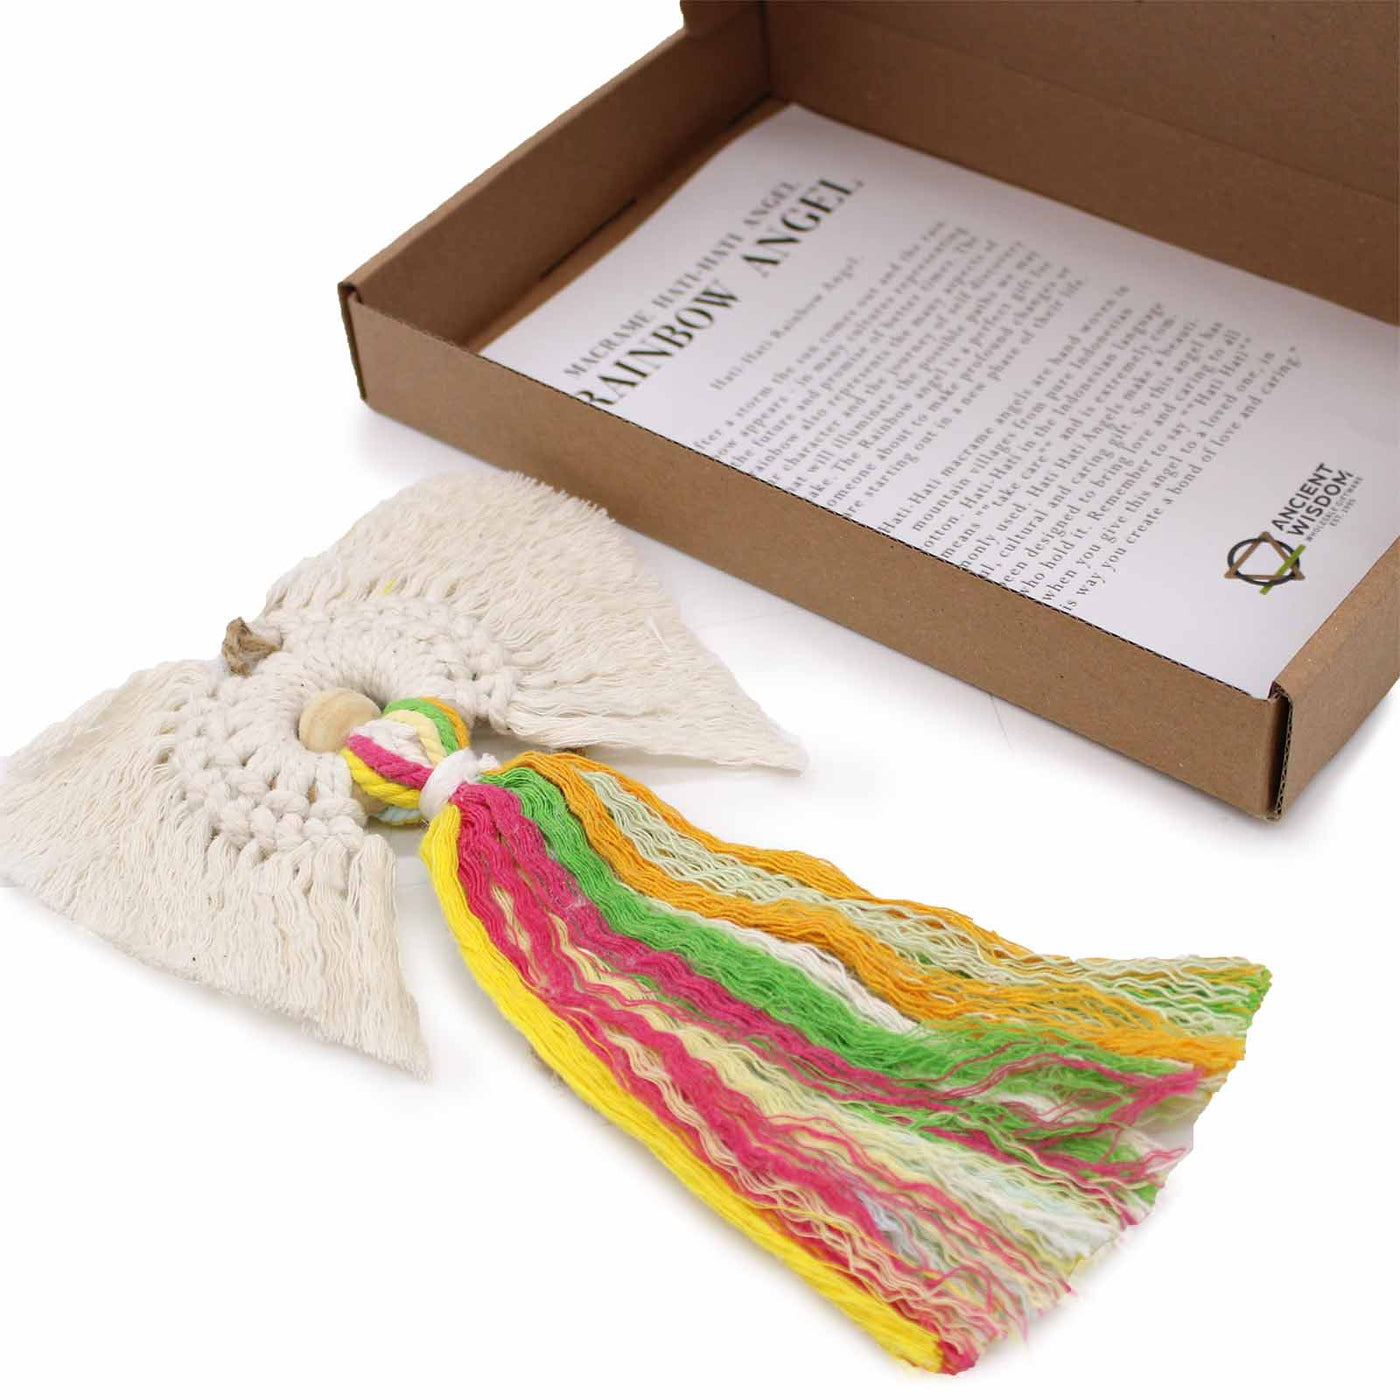 Hanging Woven Cotton Colourful Rainbow Macramé Angel in Gift Box.